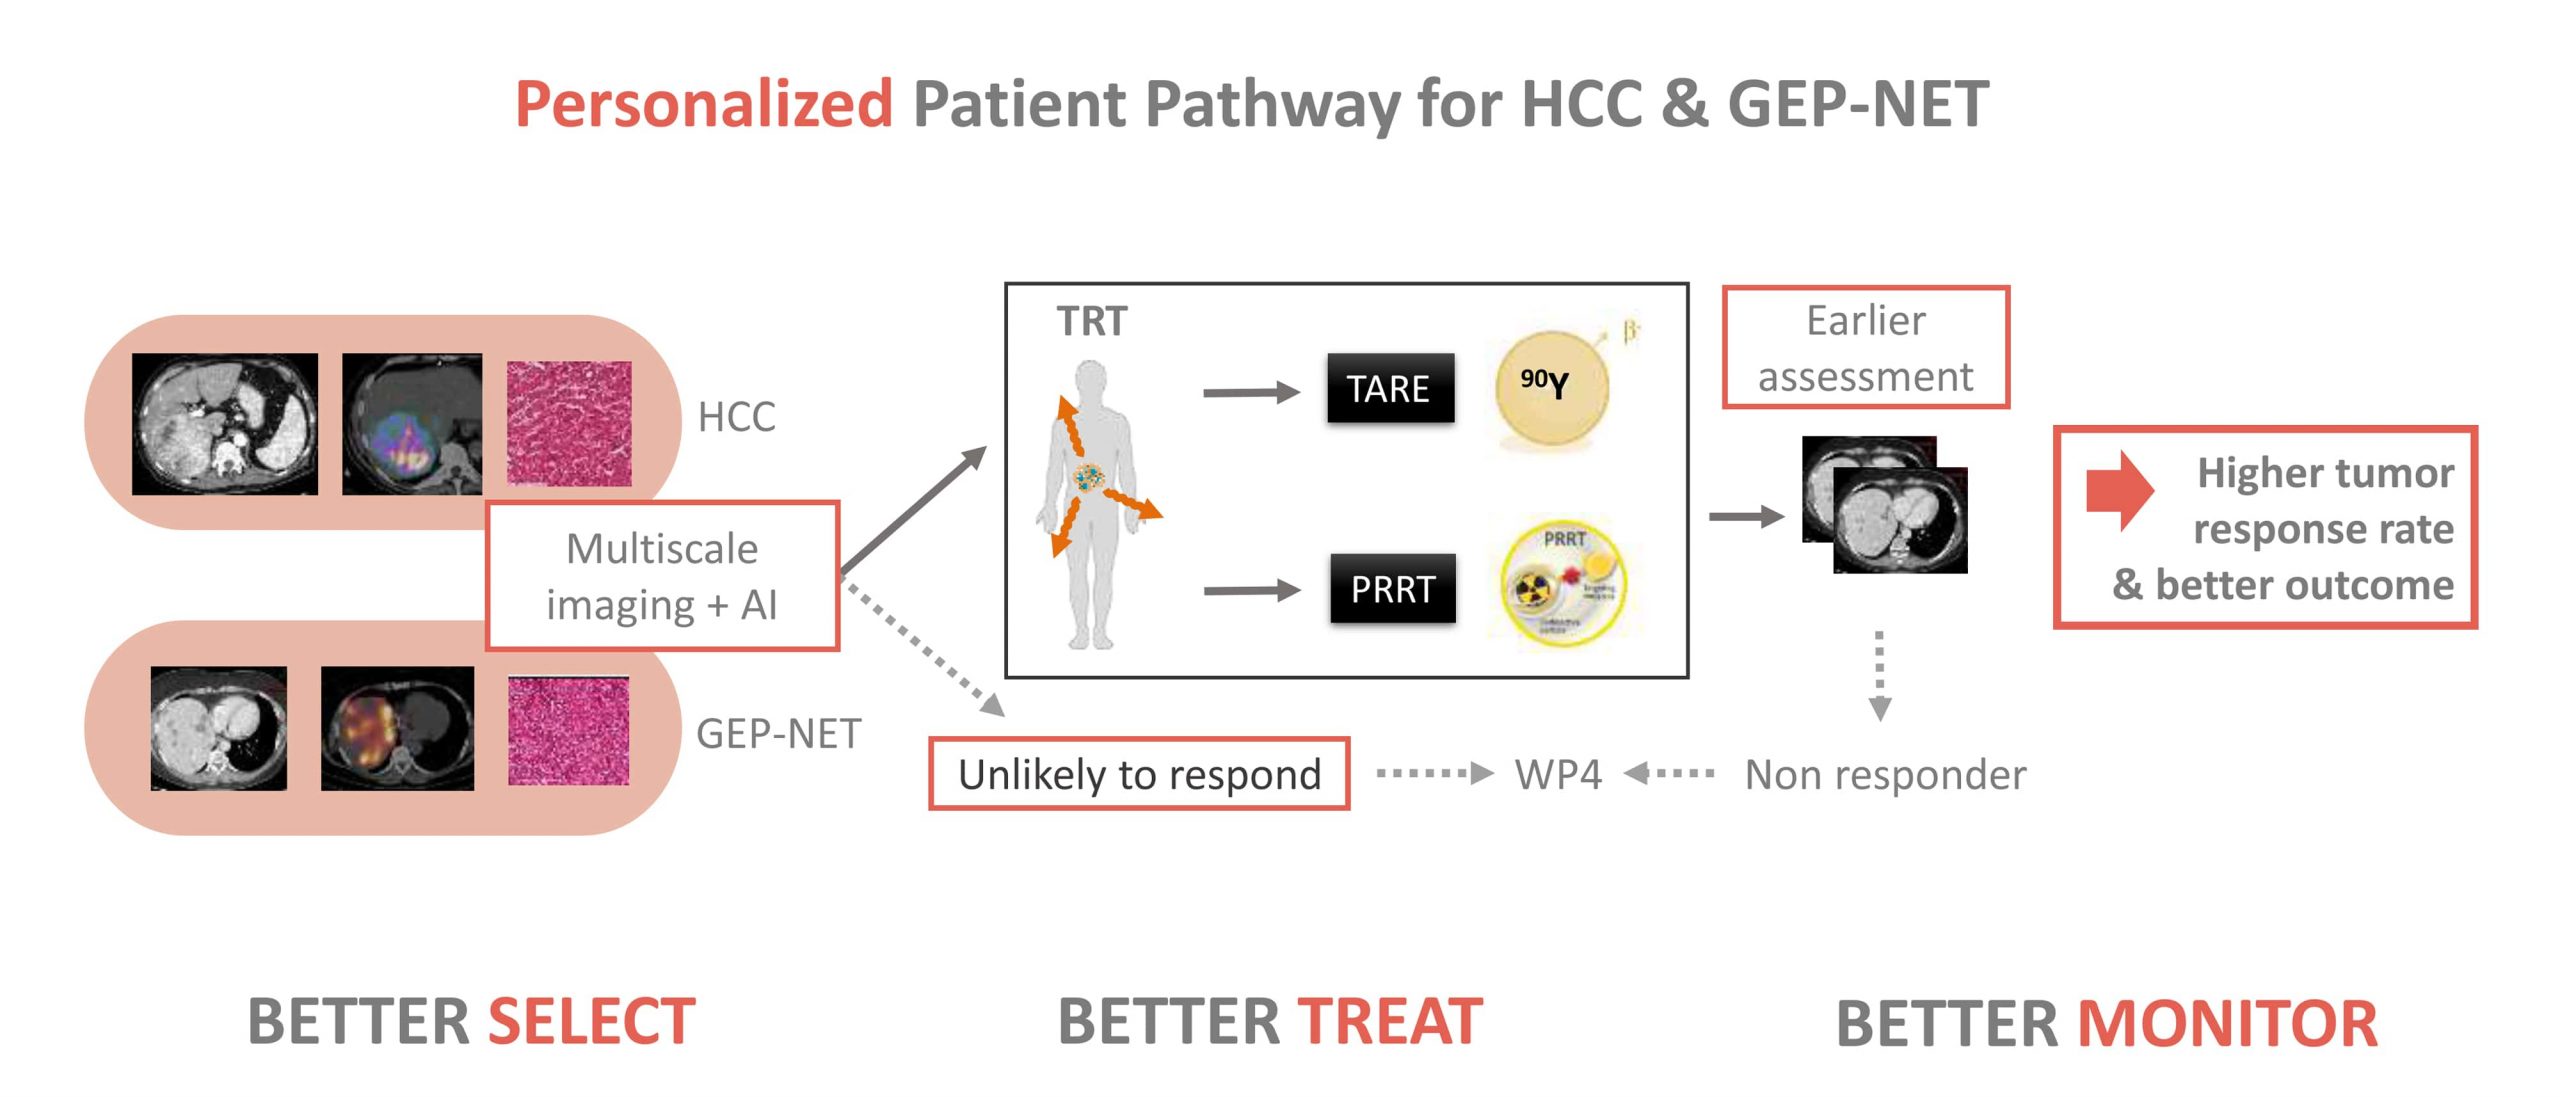 Personalized Patient Pathway for HCC & GEP-NET